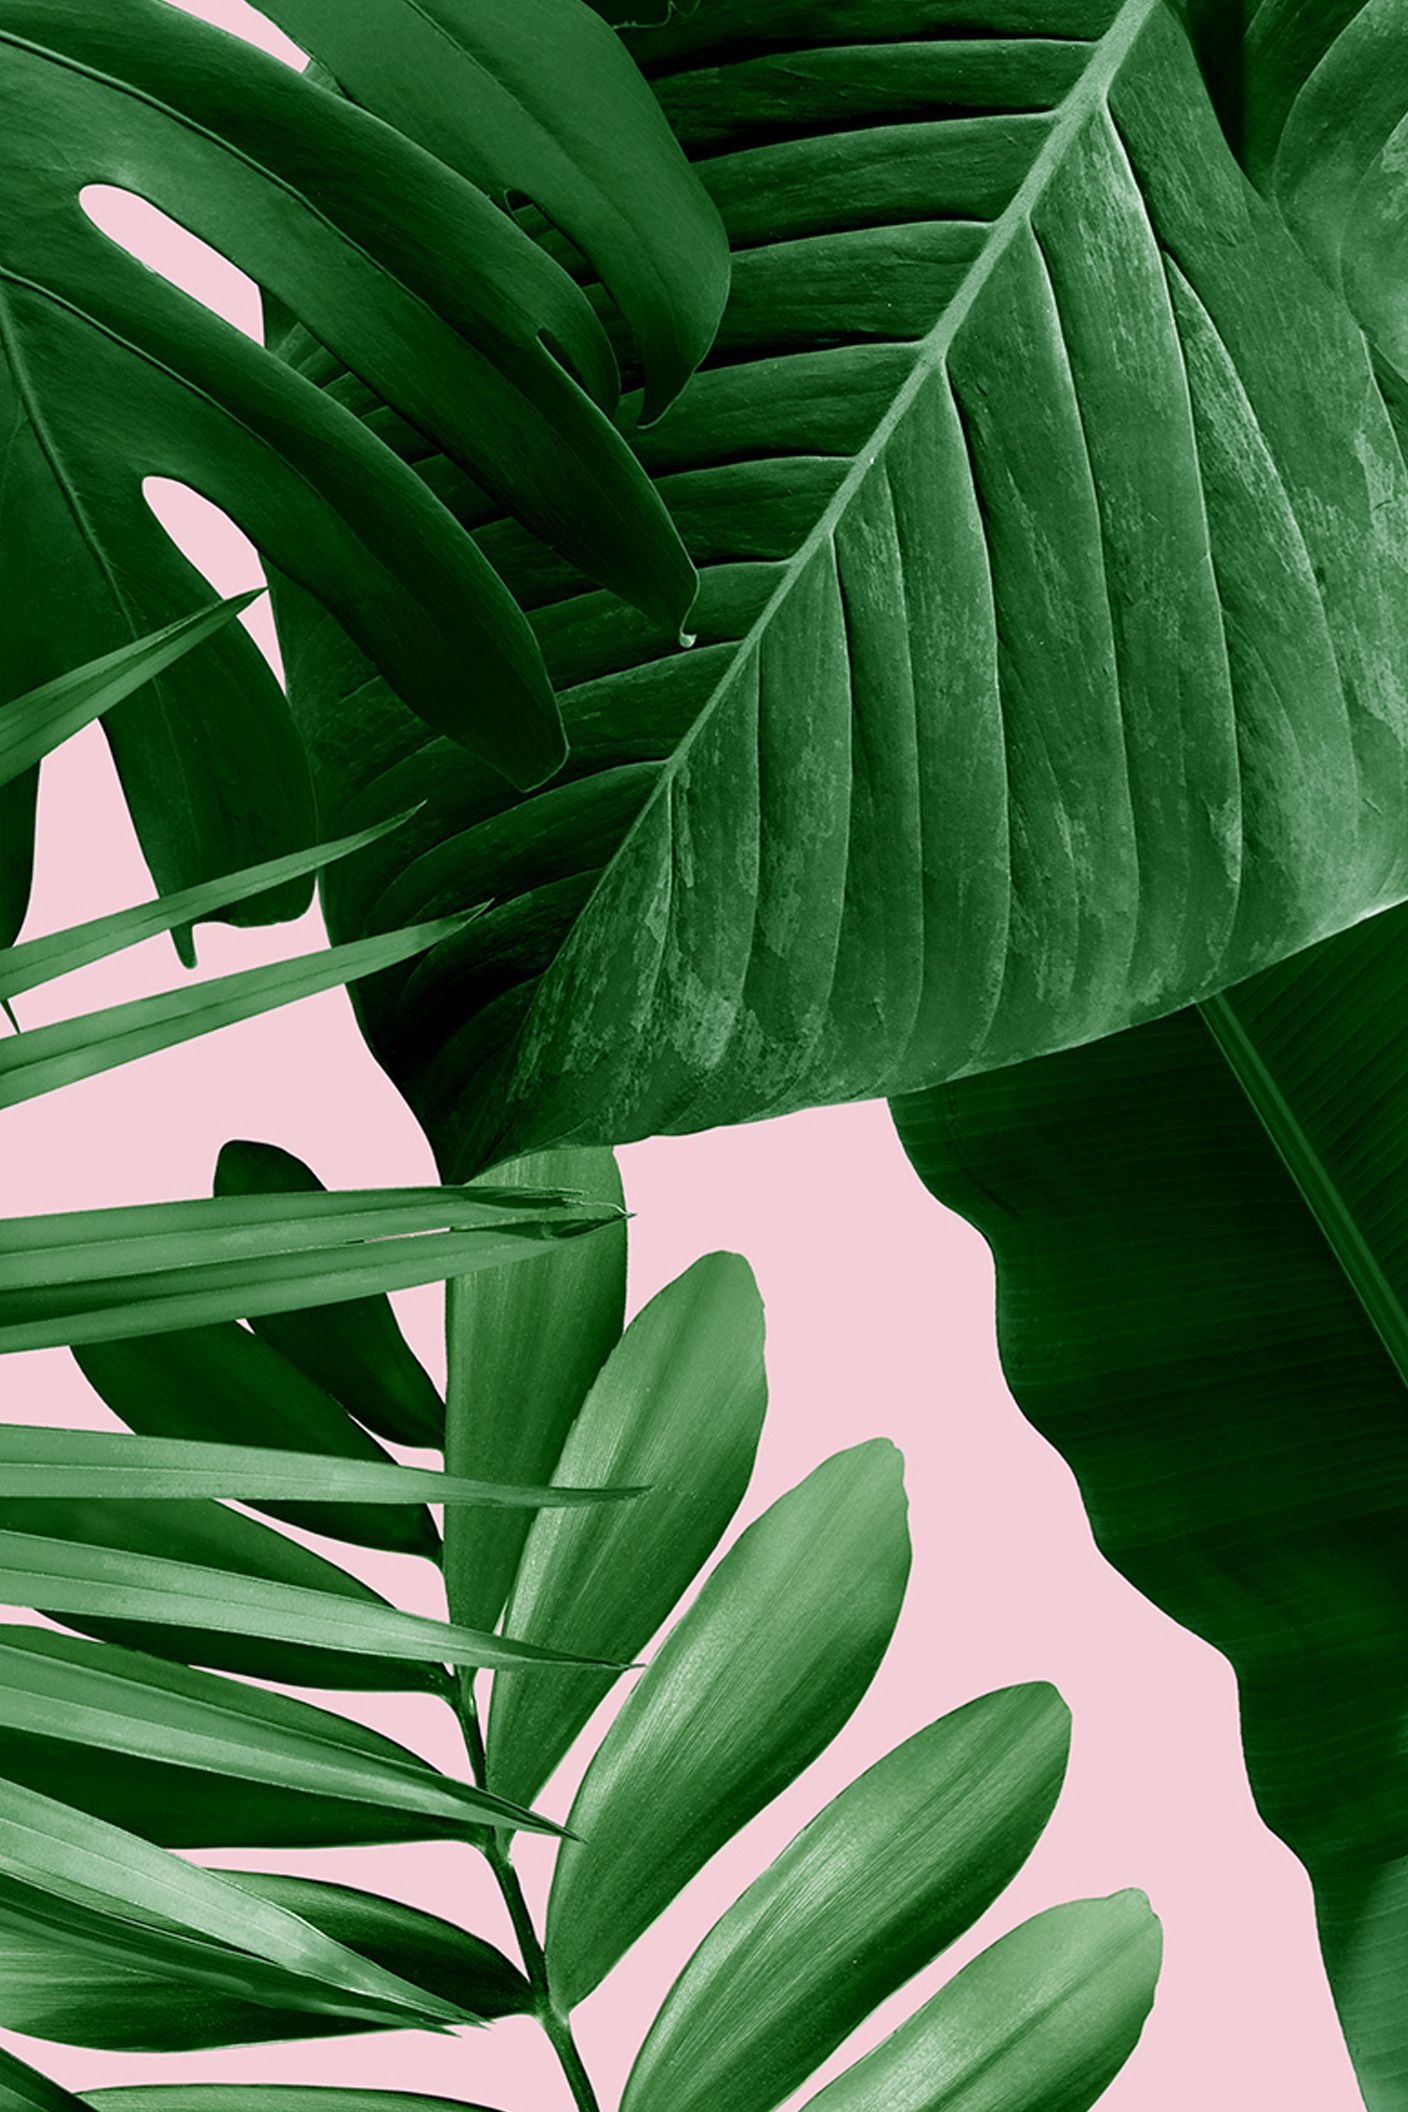 IPhone wallpaper with a tropical leaf pattern on a pink background - Plants, leaves